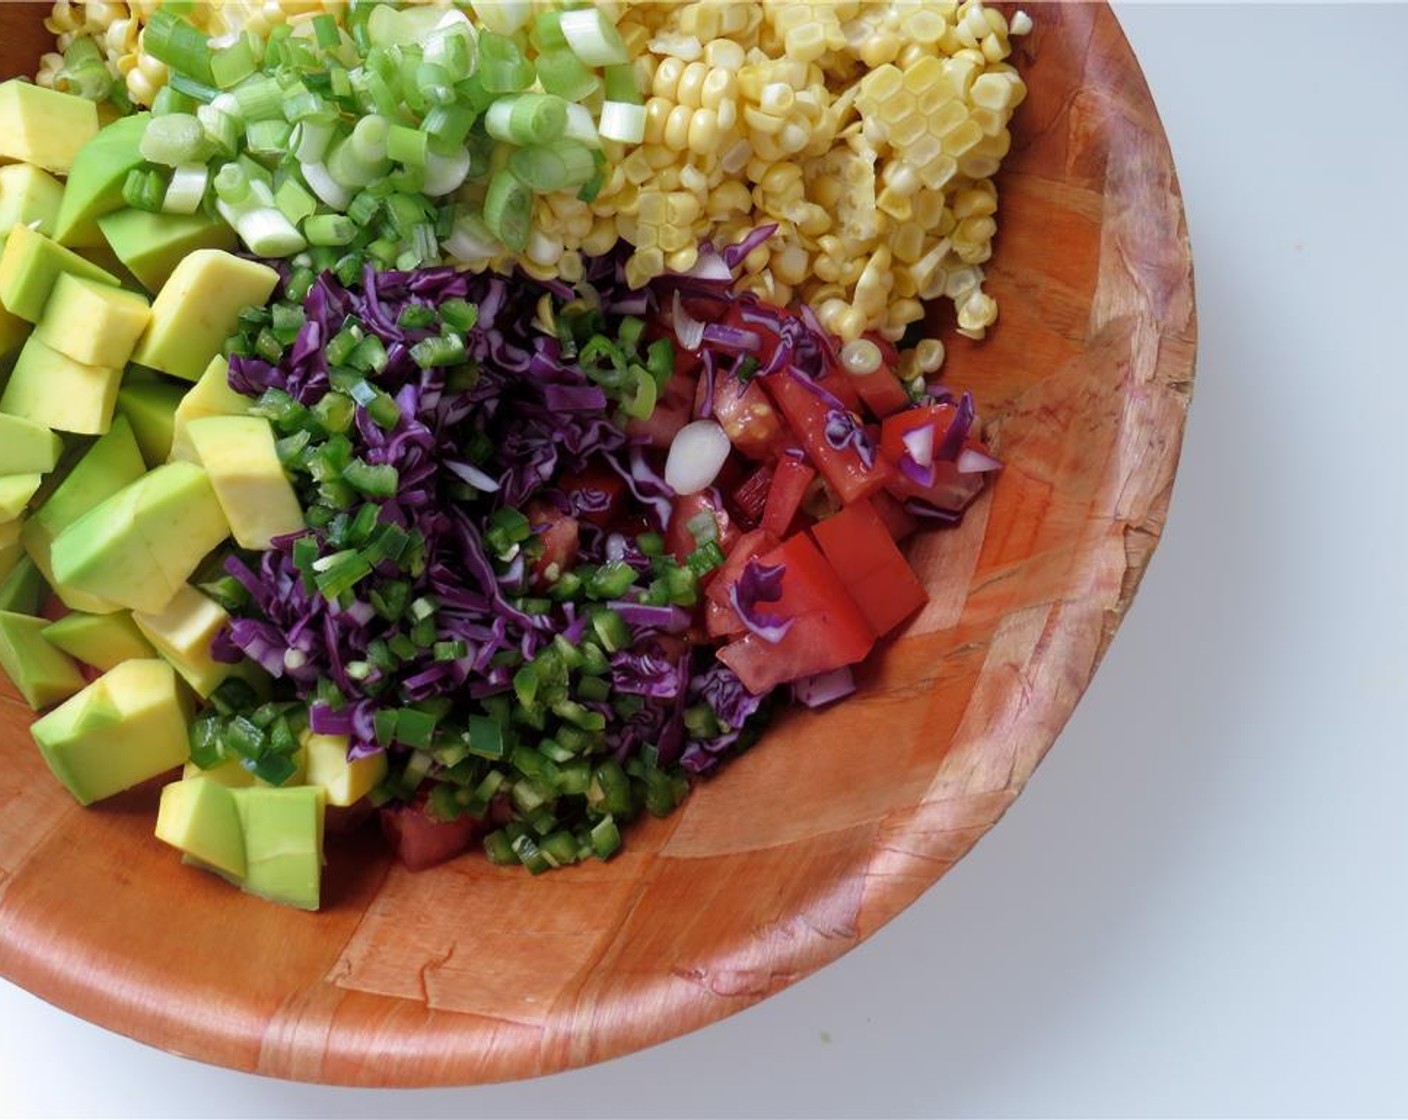 step 3 In a large bowl, combine Corn (1 1/2 cups), red cabbage, serrano peppers, scallions, red bell pepper, medium tomato, and florida avocado. Toss to combine.